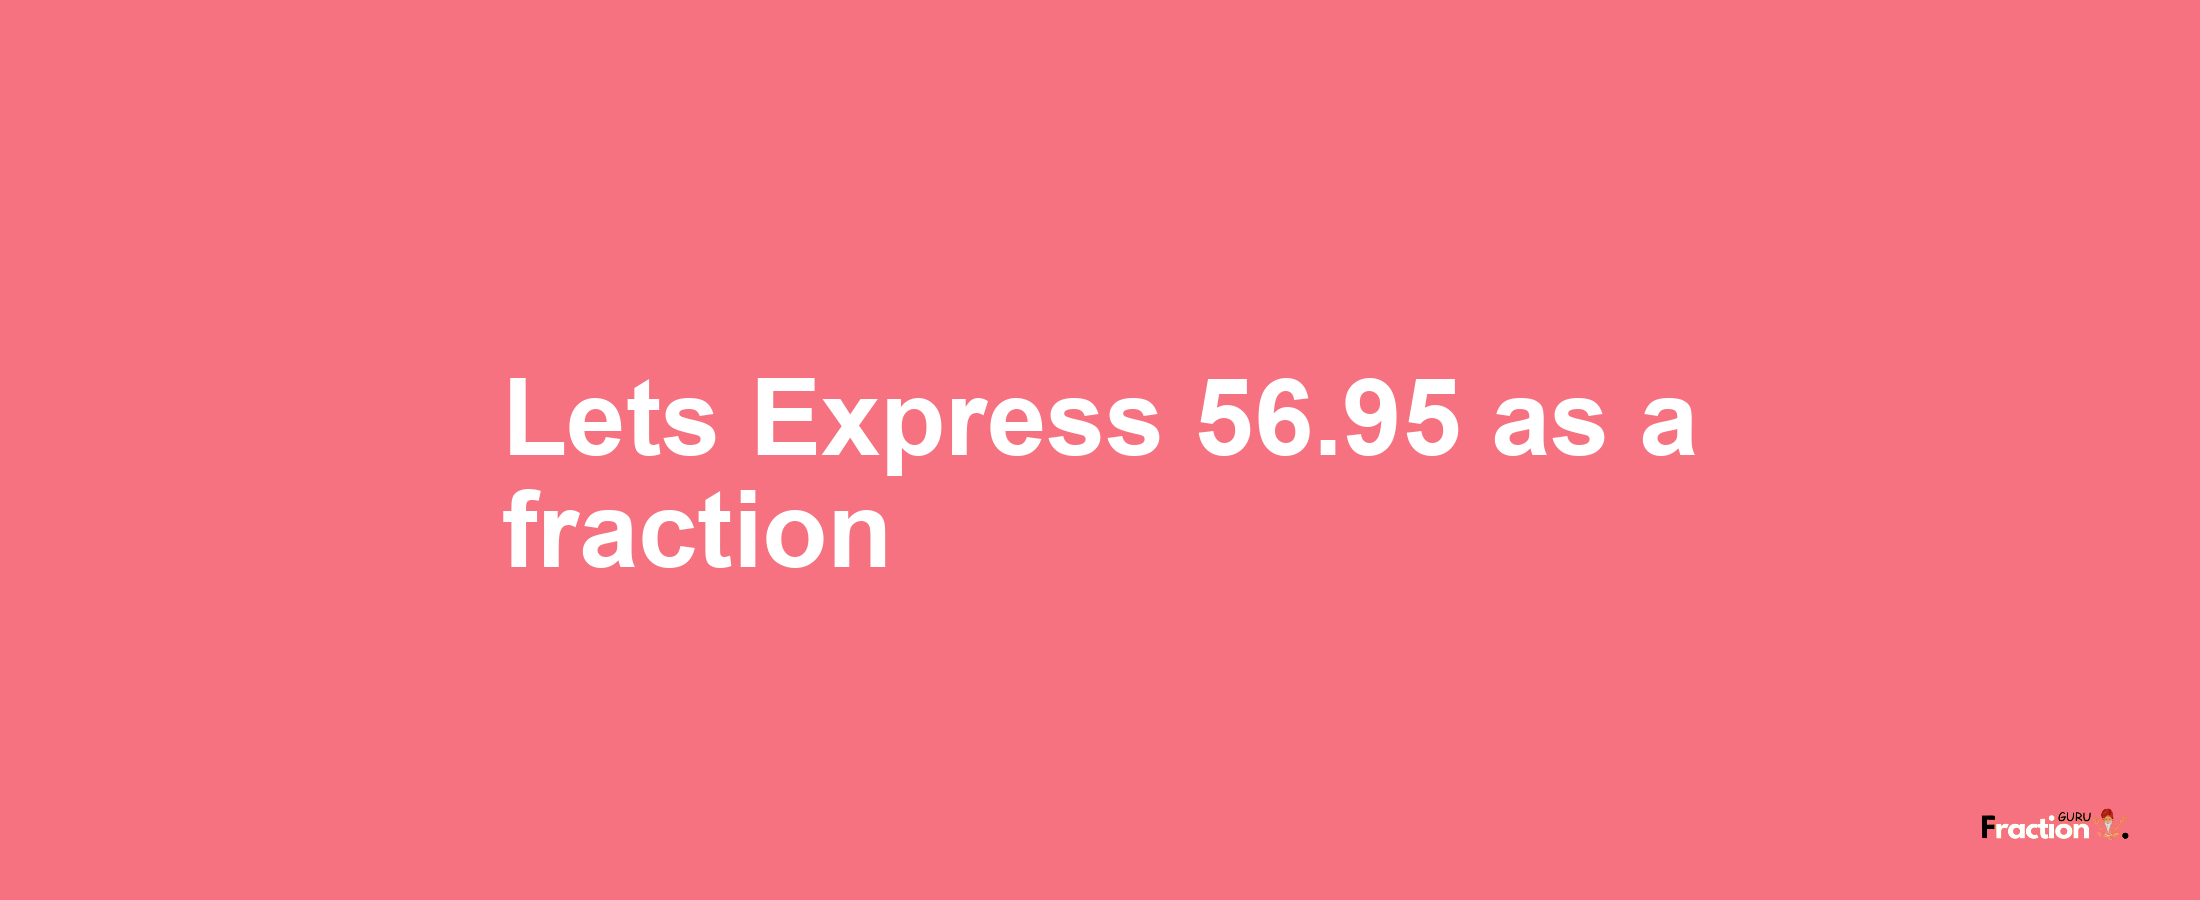 Lets Express 56.95 as afraction